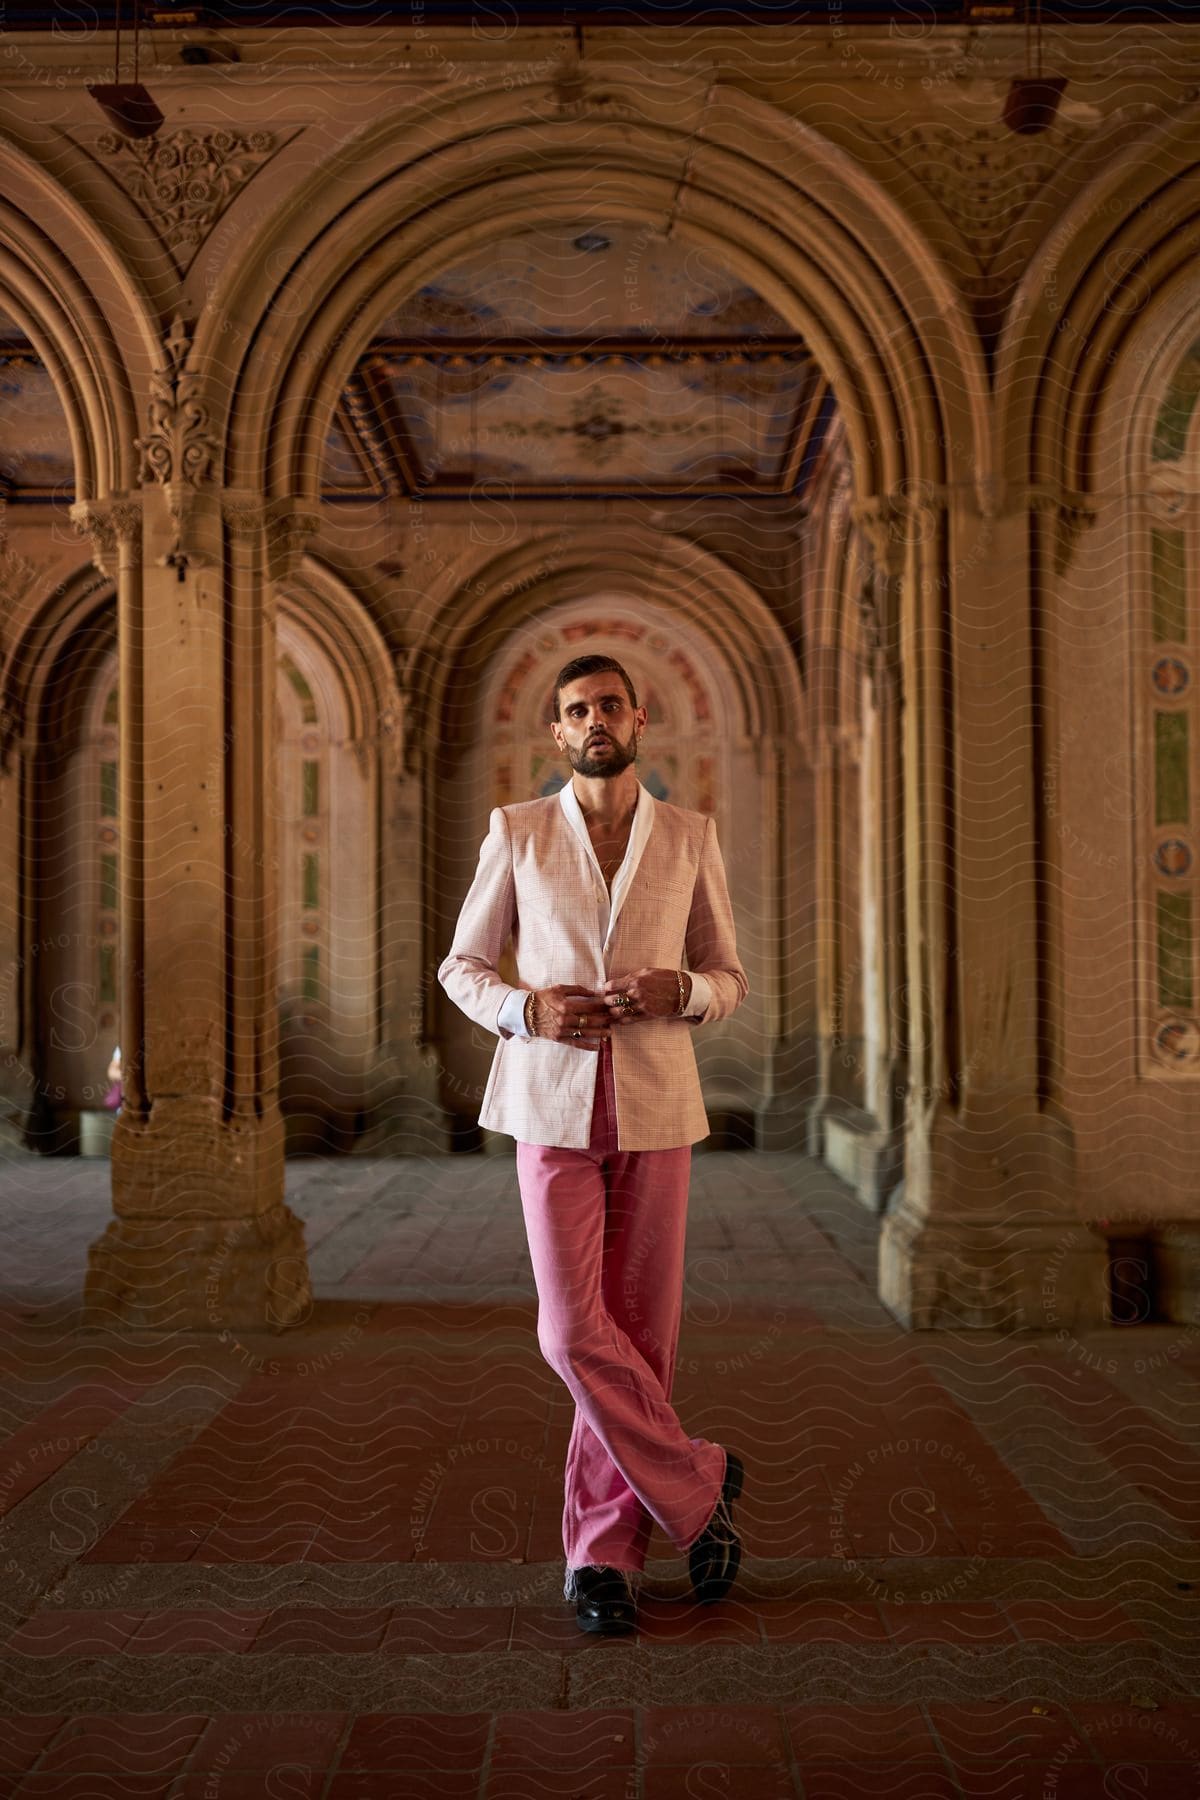 Model man posing indoors with ancient architecture and wearing a white shirt and pink pants with leather shoes